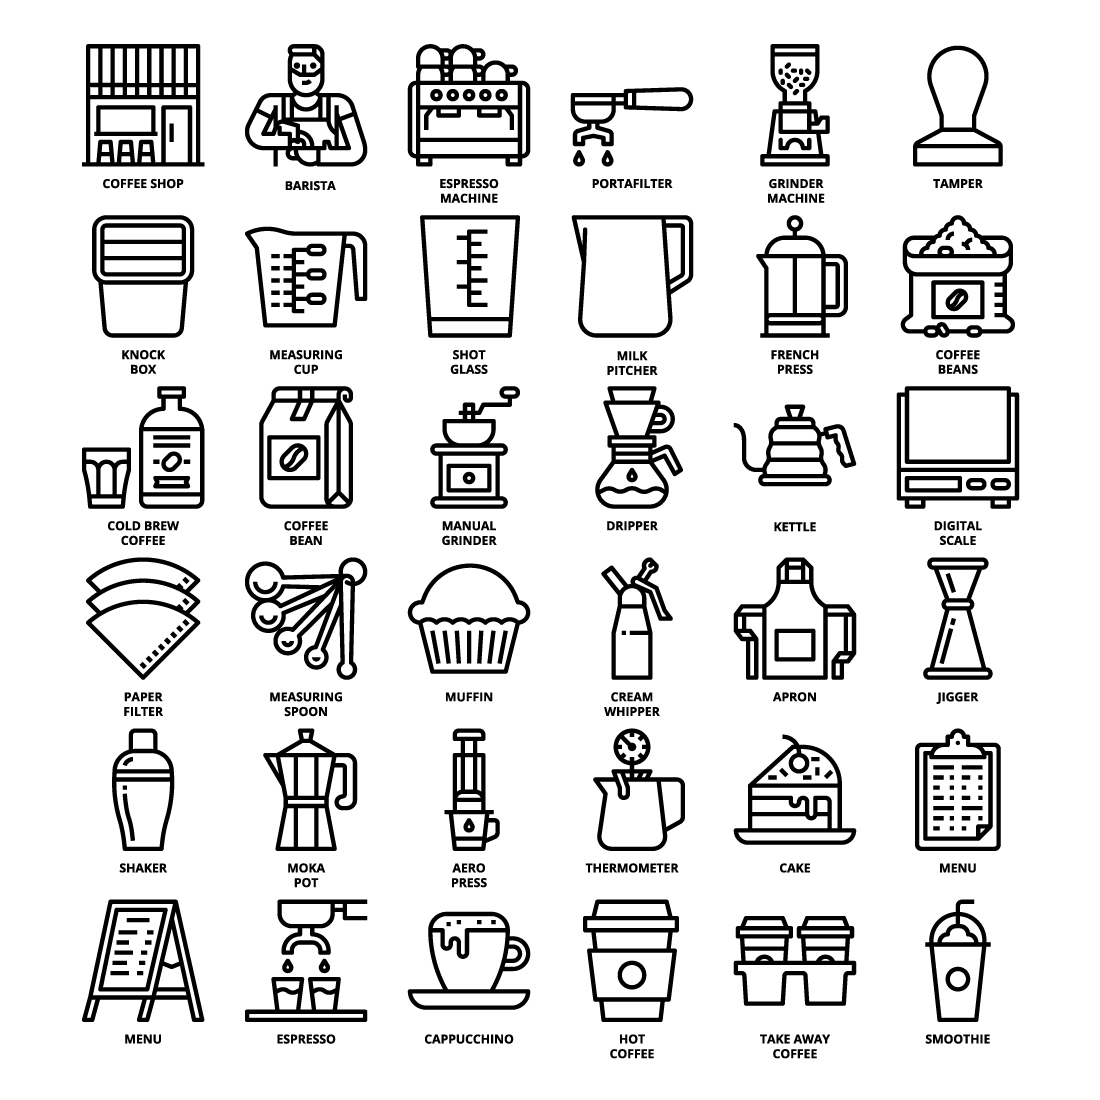 36 Coffee Shop Icons Set x 4 Styles preview image.